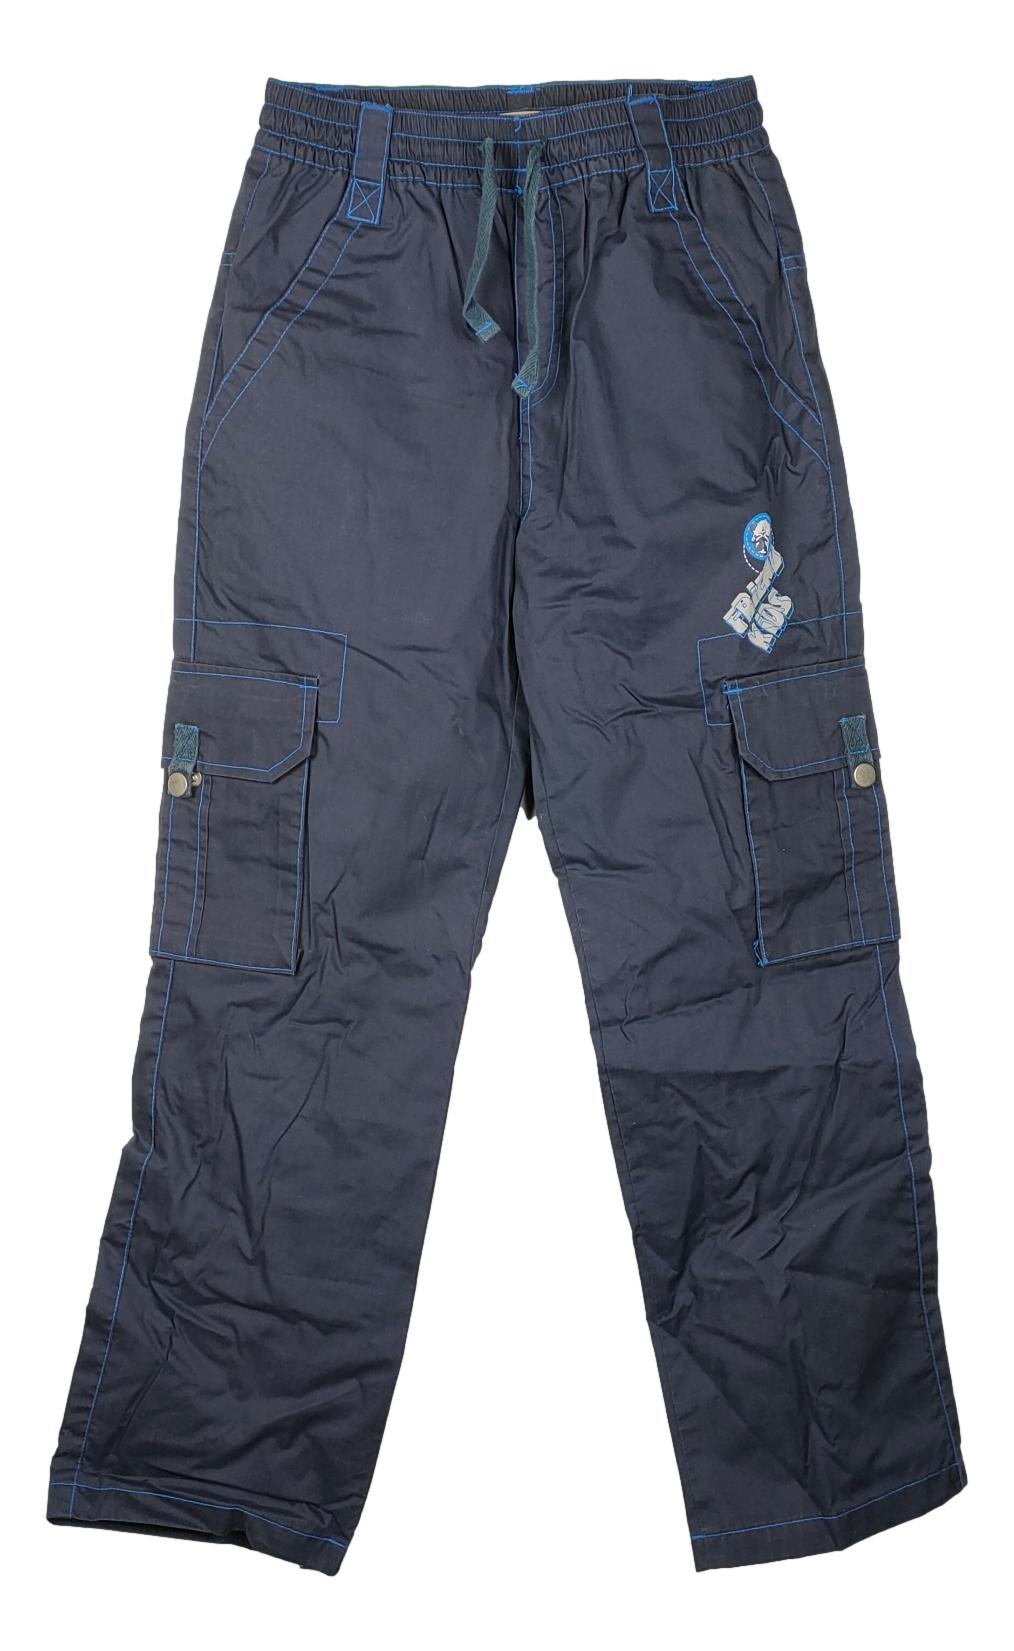 Pantalon In Extenso -Taille 10 ans